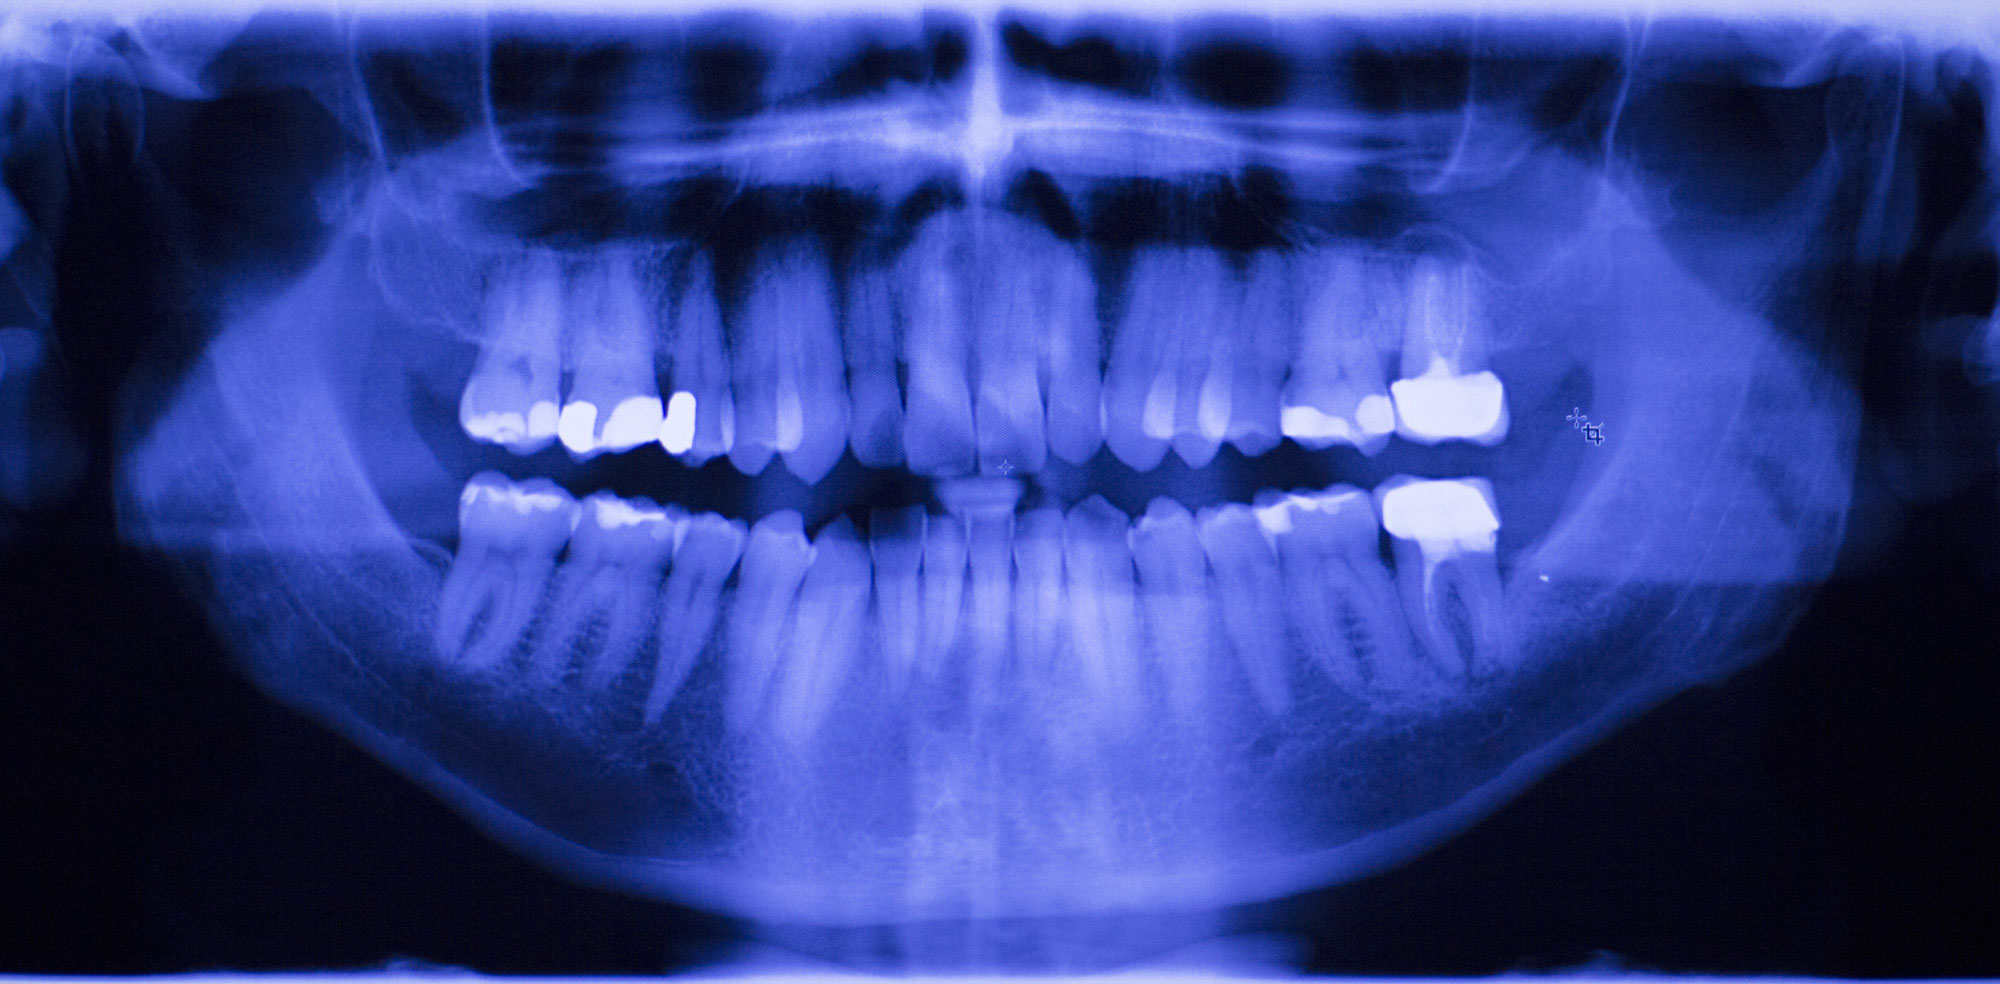 x-ray of a mouth full of teeth